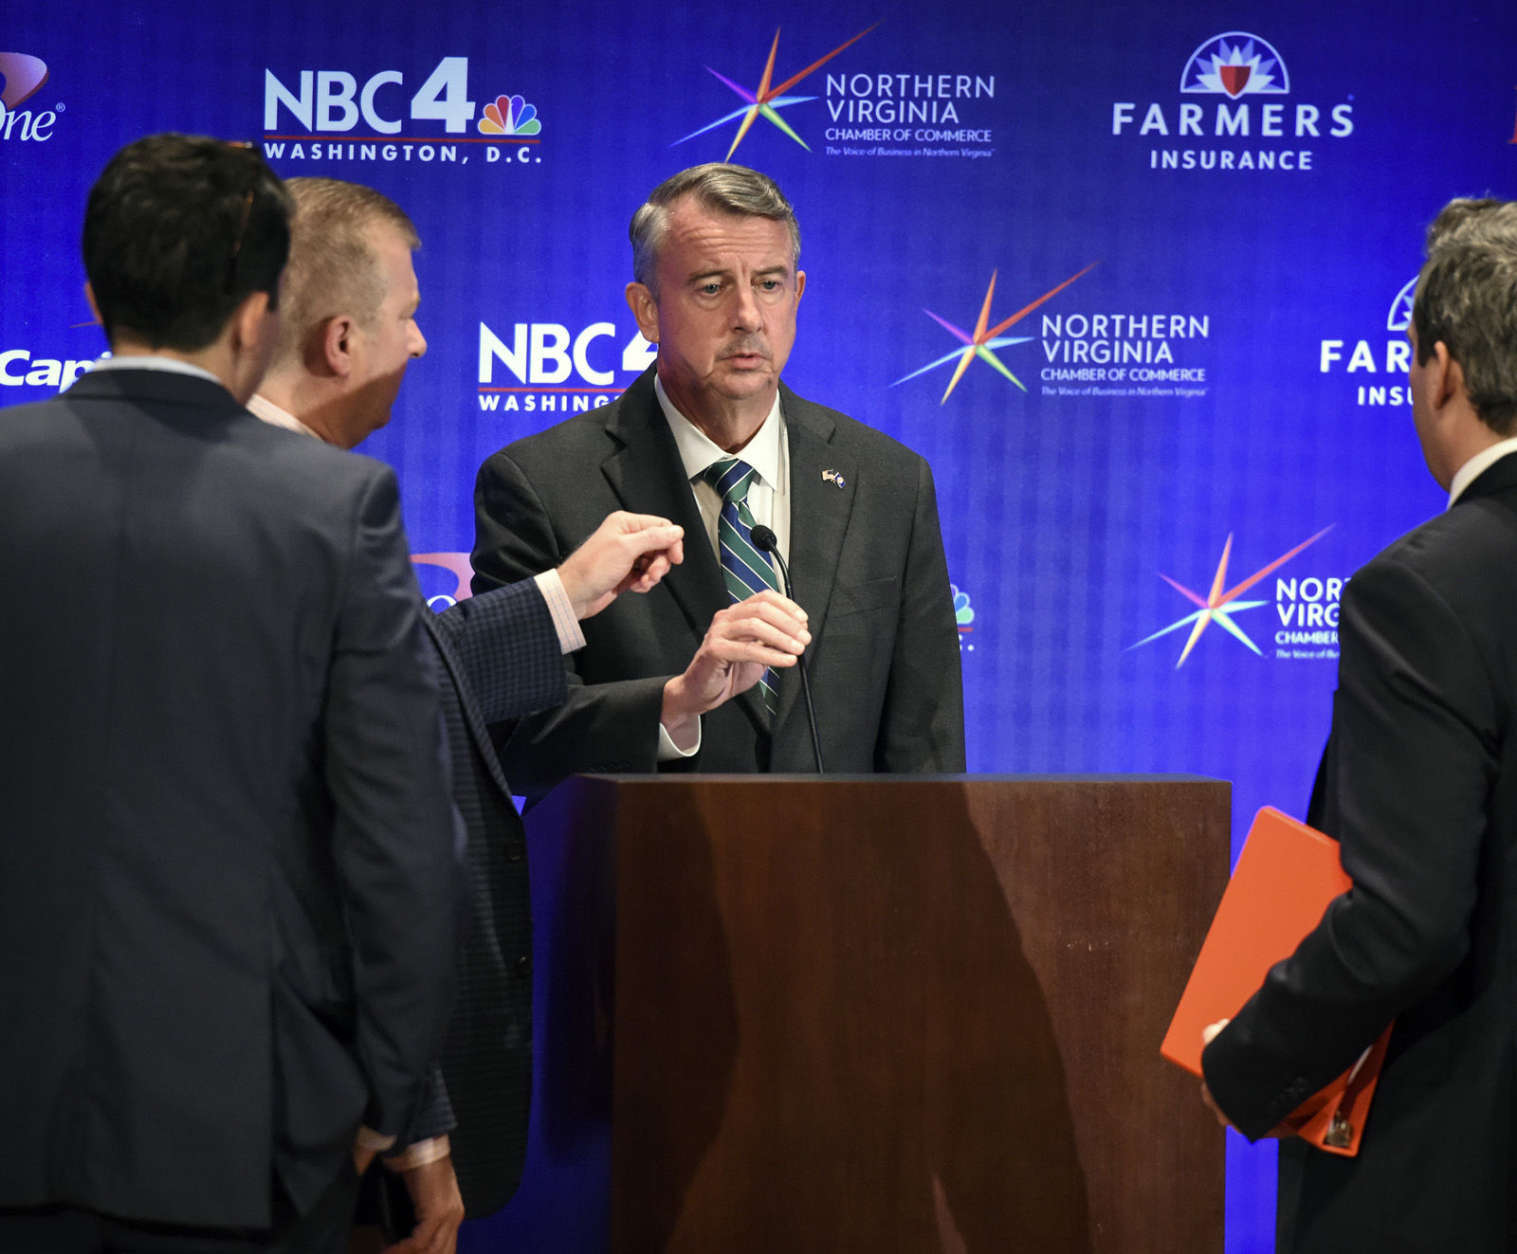 MCLEAN, VA - SEPTEMBER 19:
Republican candidate Ed Gillespie, center, during his walk-through for tonight's Gubernatorial debate between himself and Lt. Gov. Ralph Northam, Democrat, on September, 19, 2017 in McLean, VA.
(Pool Photo by Bill O'Leary/The Washington Post)